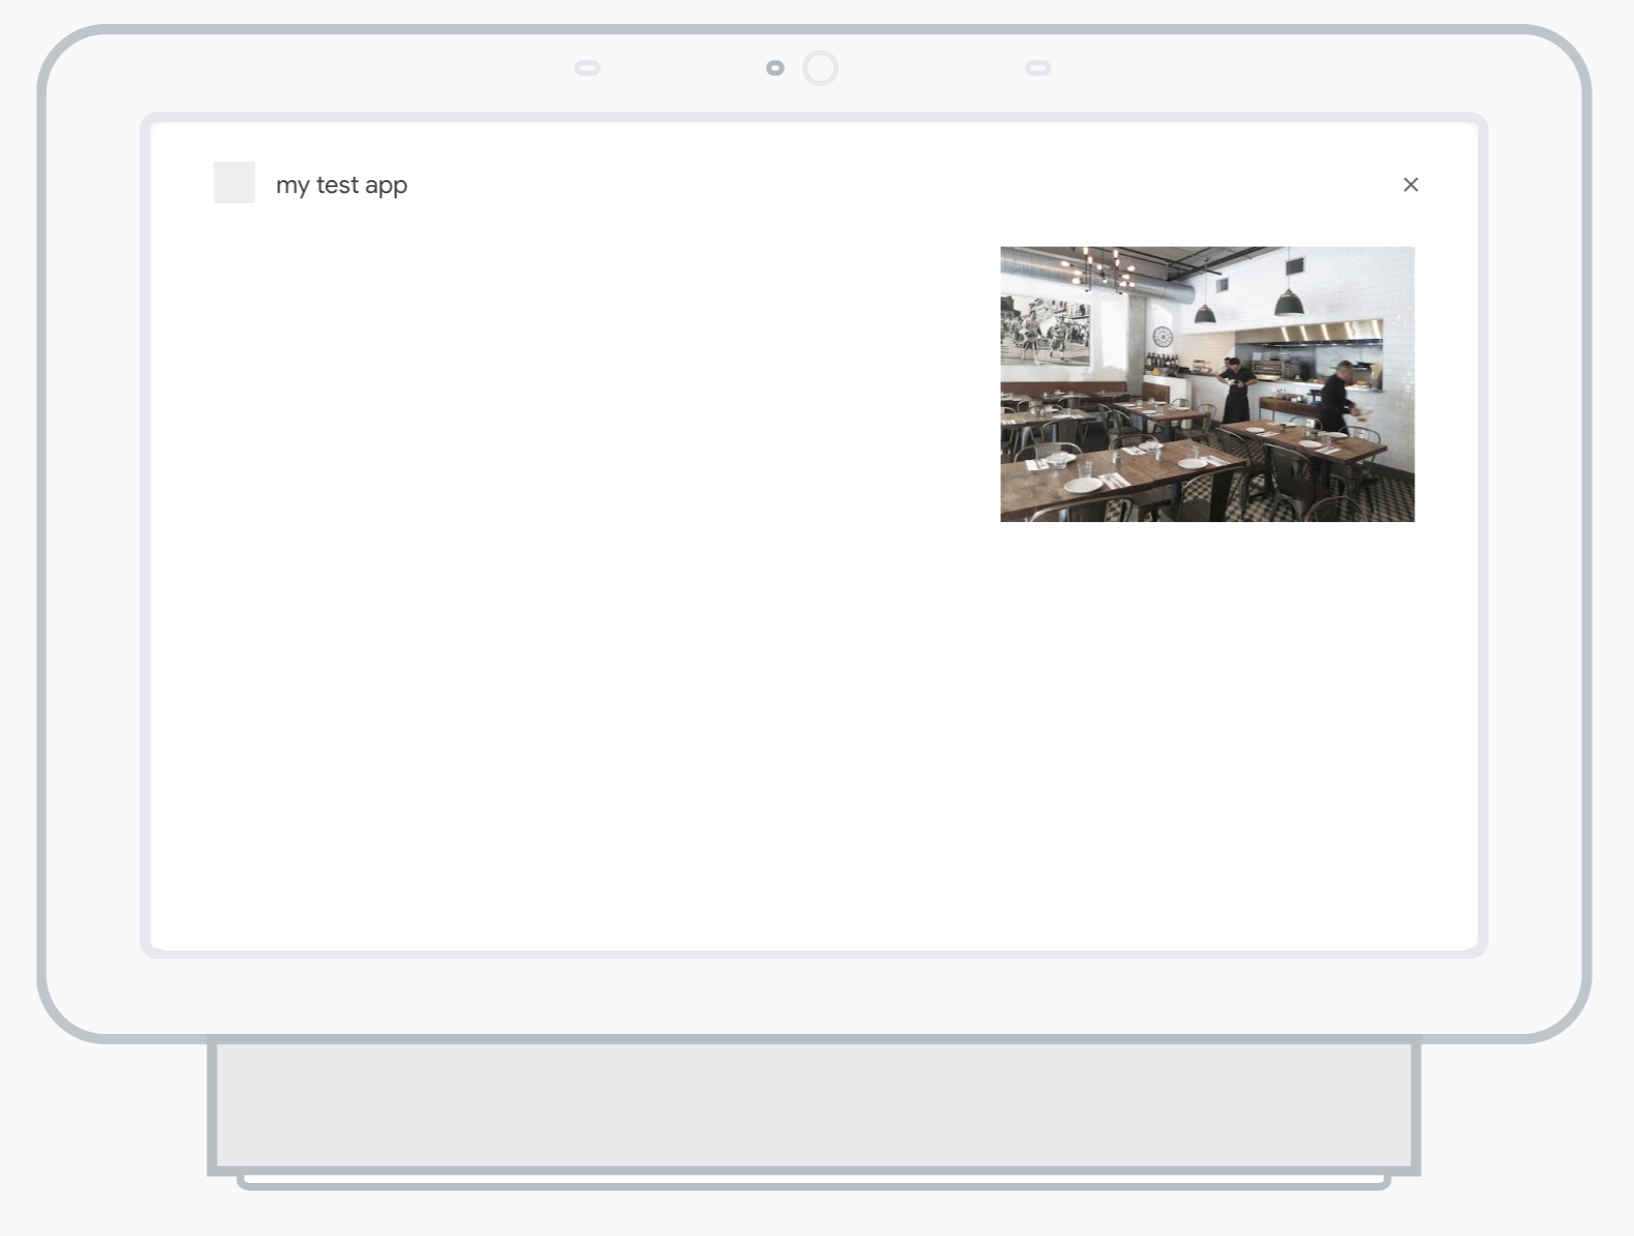 Actions simulator displaying image of a restuarant